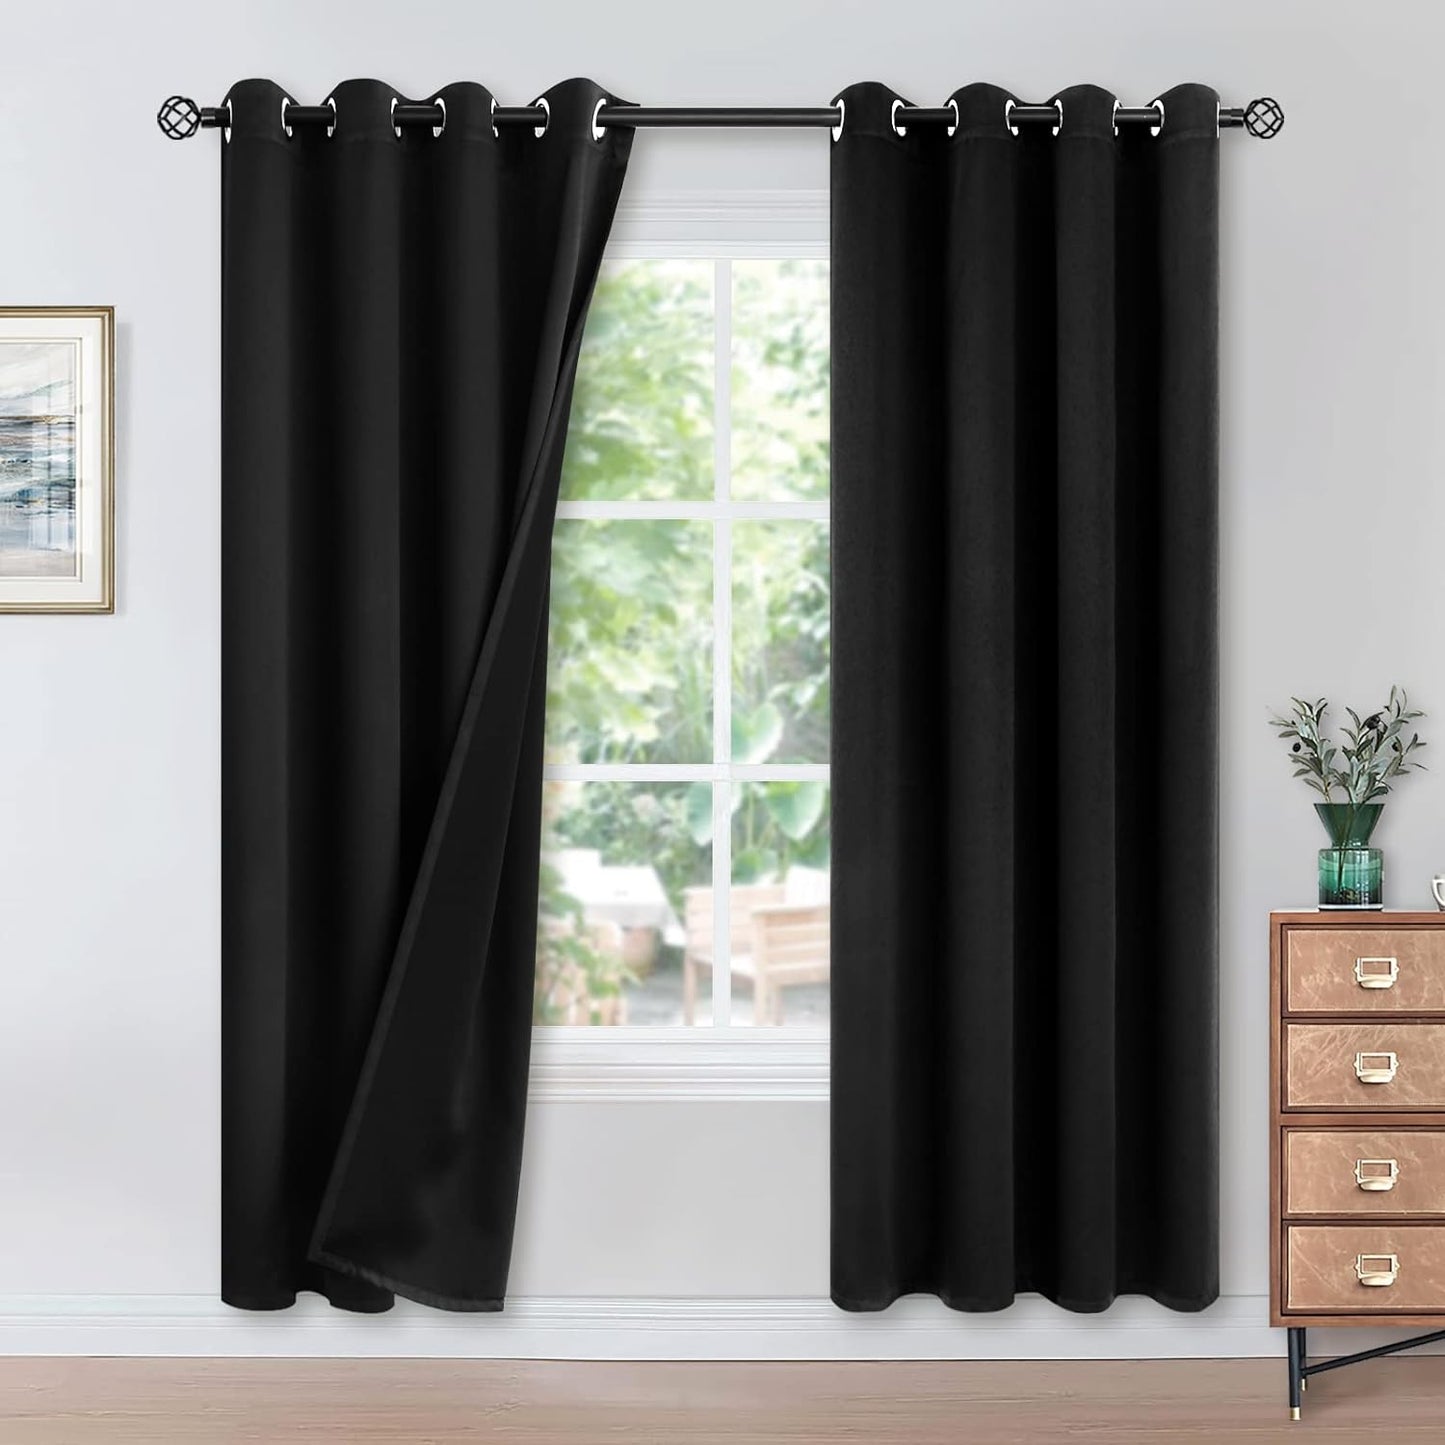 Youngstex Black 100% Blackout Curtains 63 Inches for Bedroom Thermal Insulated Total Room Darkening Curtains for Living Room Window with Black Back Grommet, 2 Panels, 42 X 63 Inch  YoungsTex Black 52W X 84L 